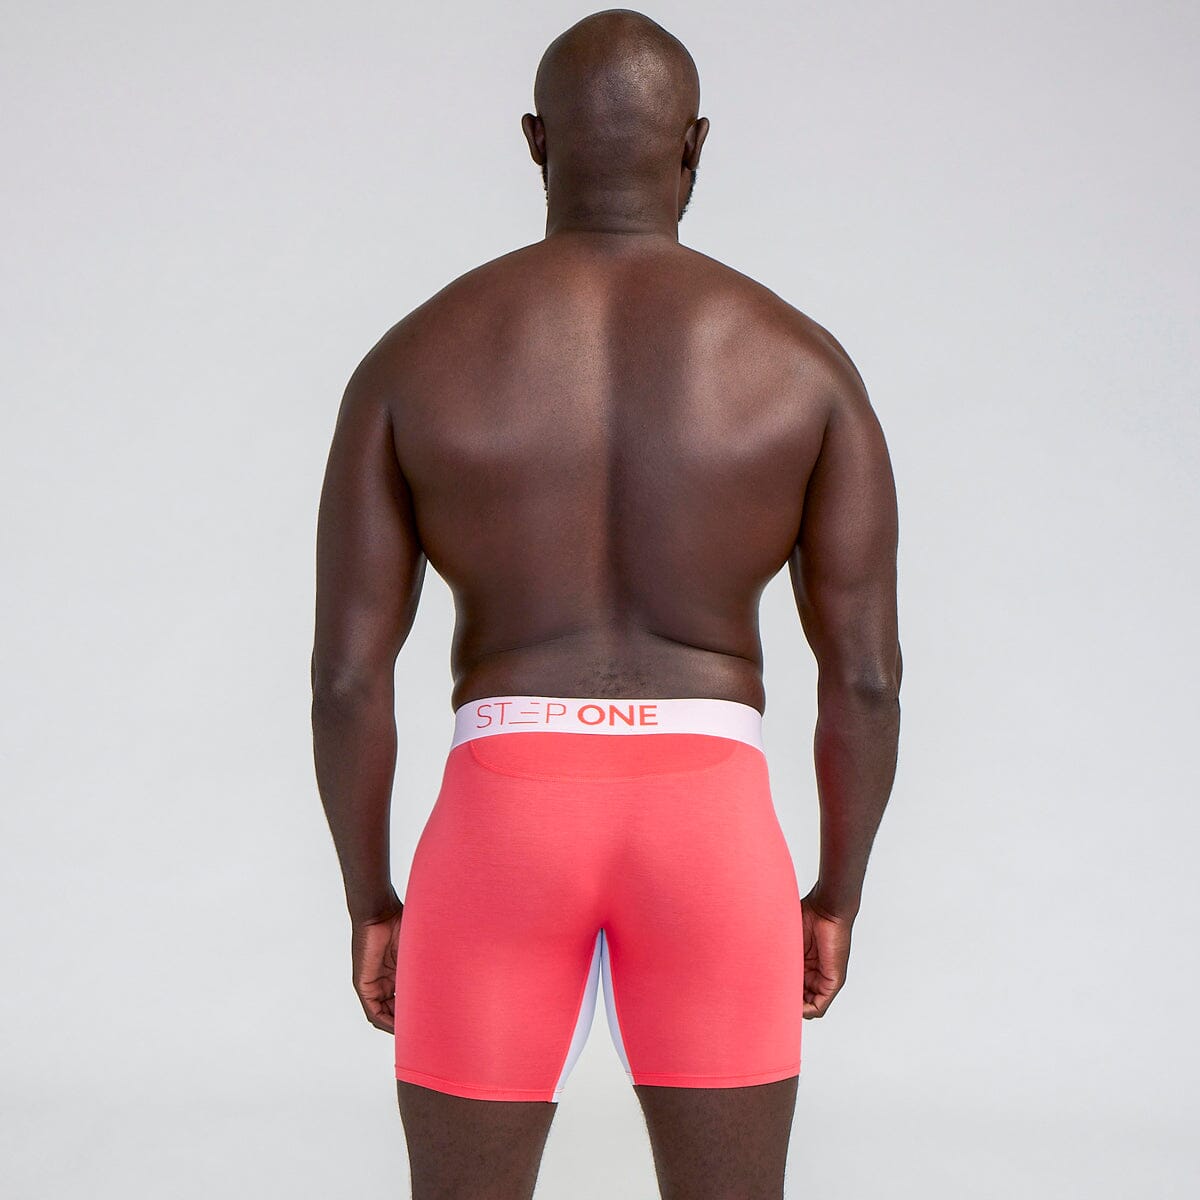 Red and White Bamboo Underwear for Men